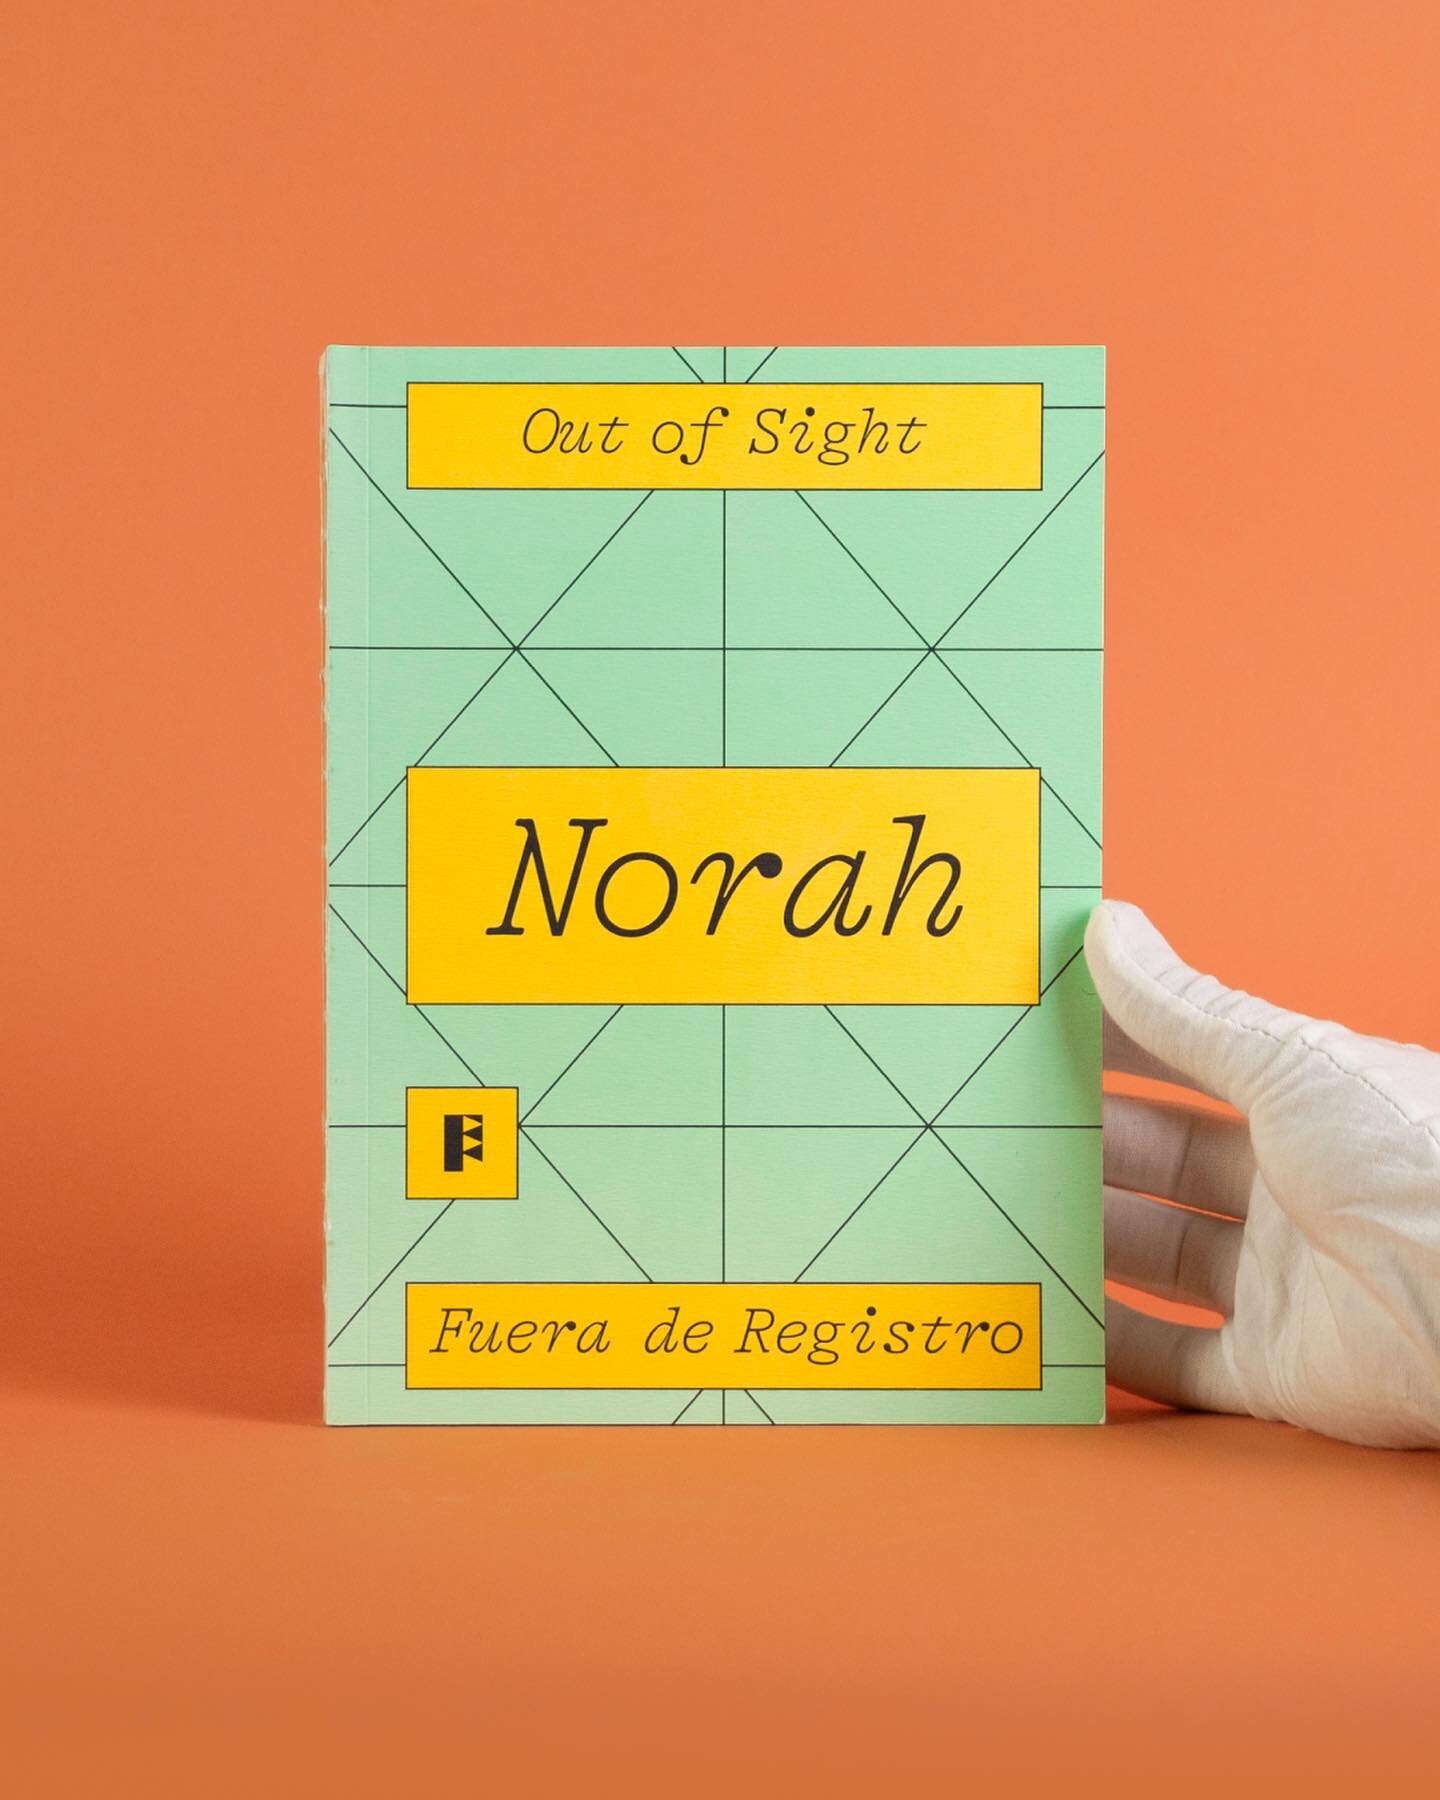 Cover 🤝 Backcover
Our latest book on the creative process of Argentinean artist Norah Borges is now out in the US and available for worldwide orders. Shipping starts mid-May. Get your copy, link in bio.